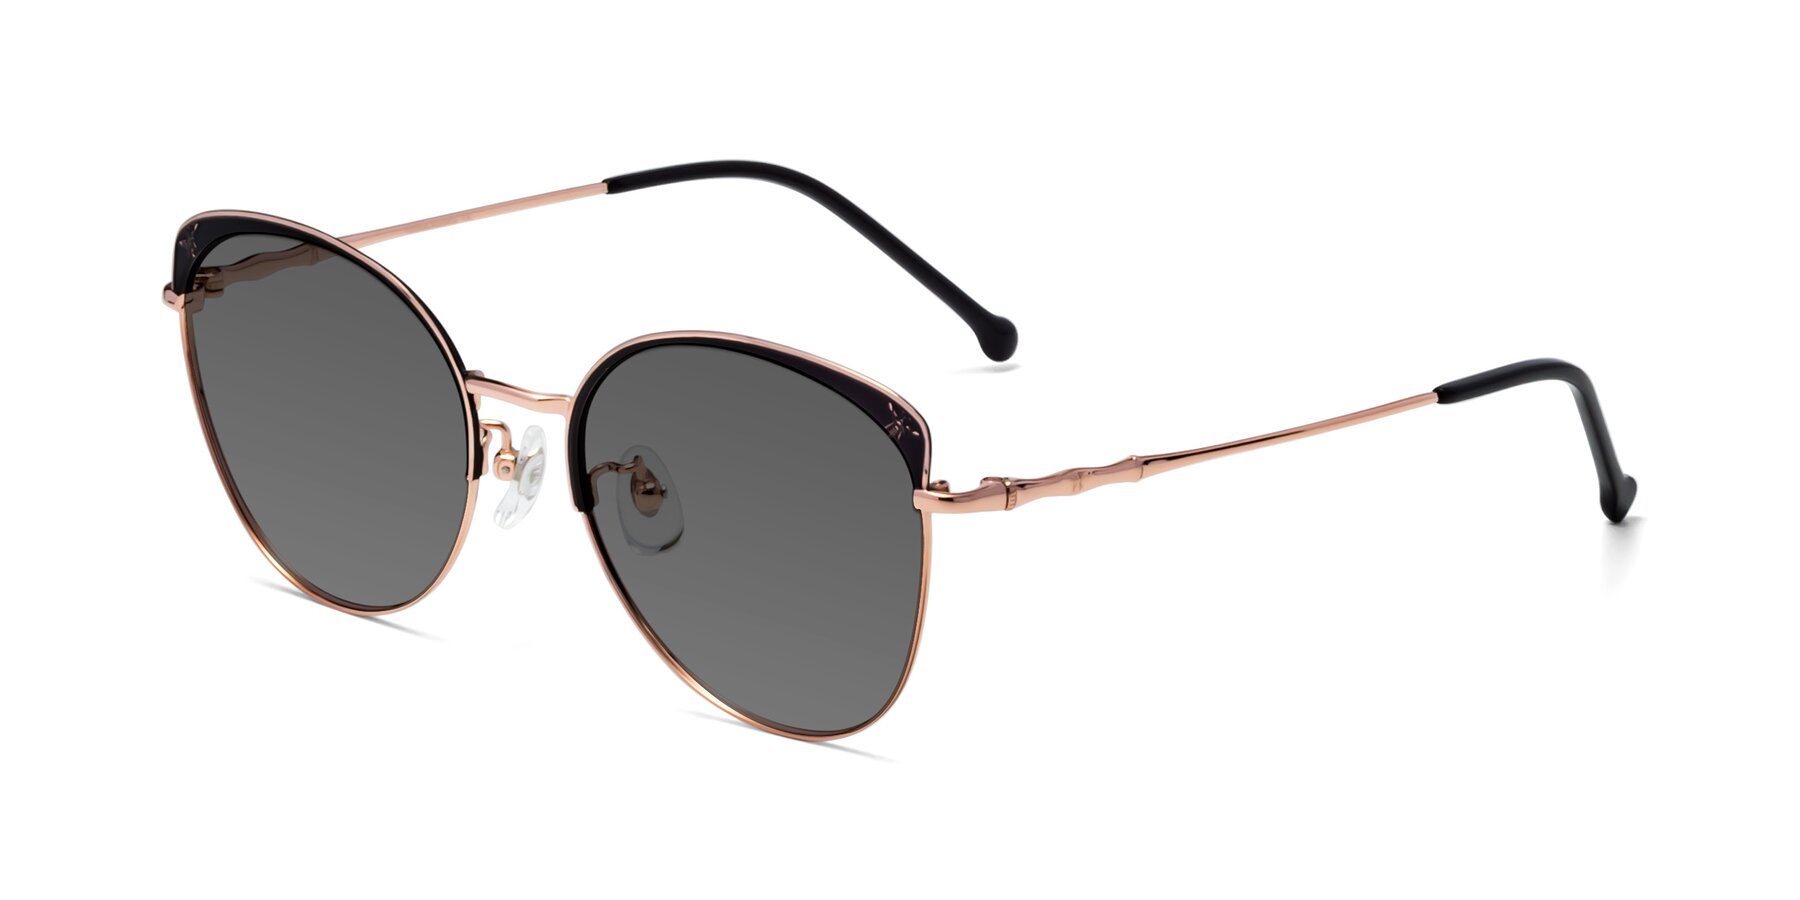 Angle of 18019 in Black-Rose Gold with Medium Gray Tinted Lenses